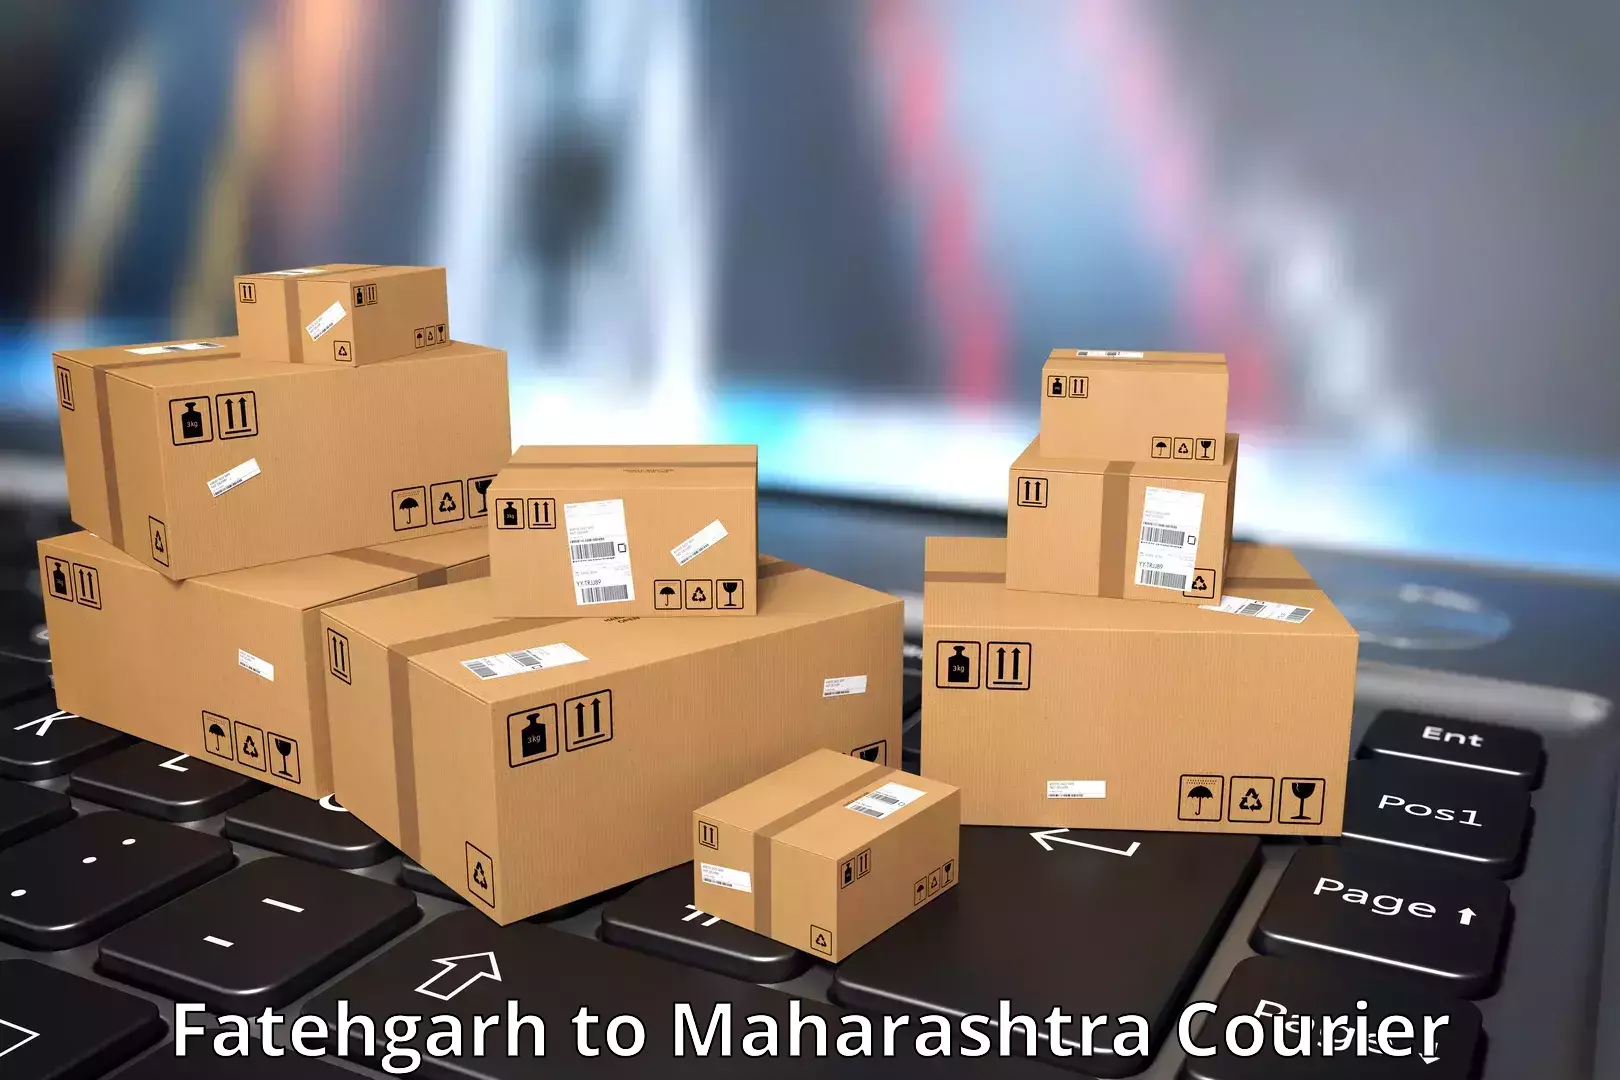 Reliable package handling in Fatehgarh to Kopargaon